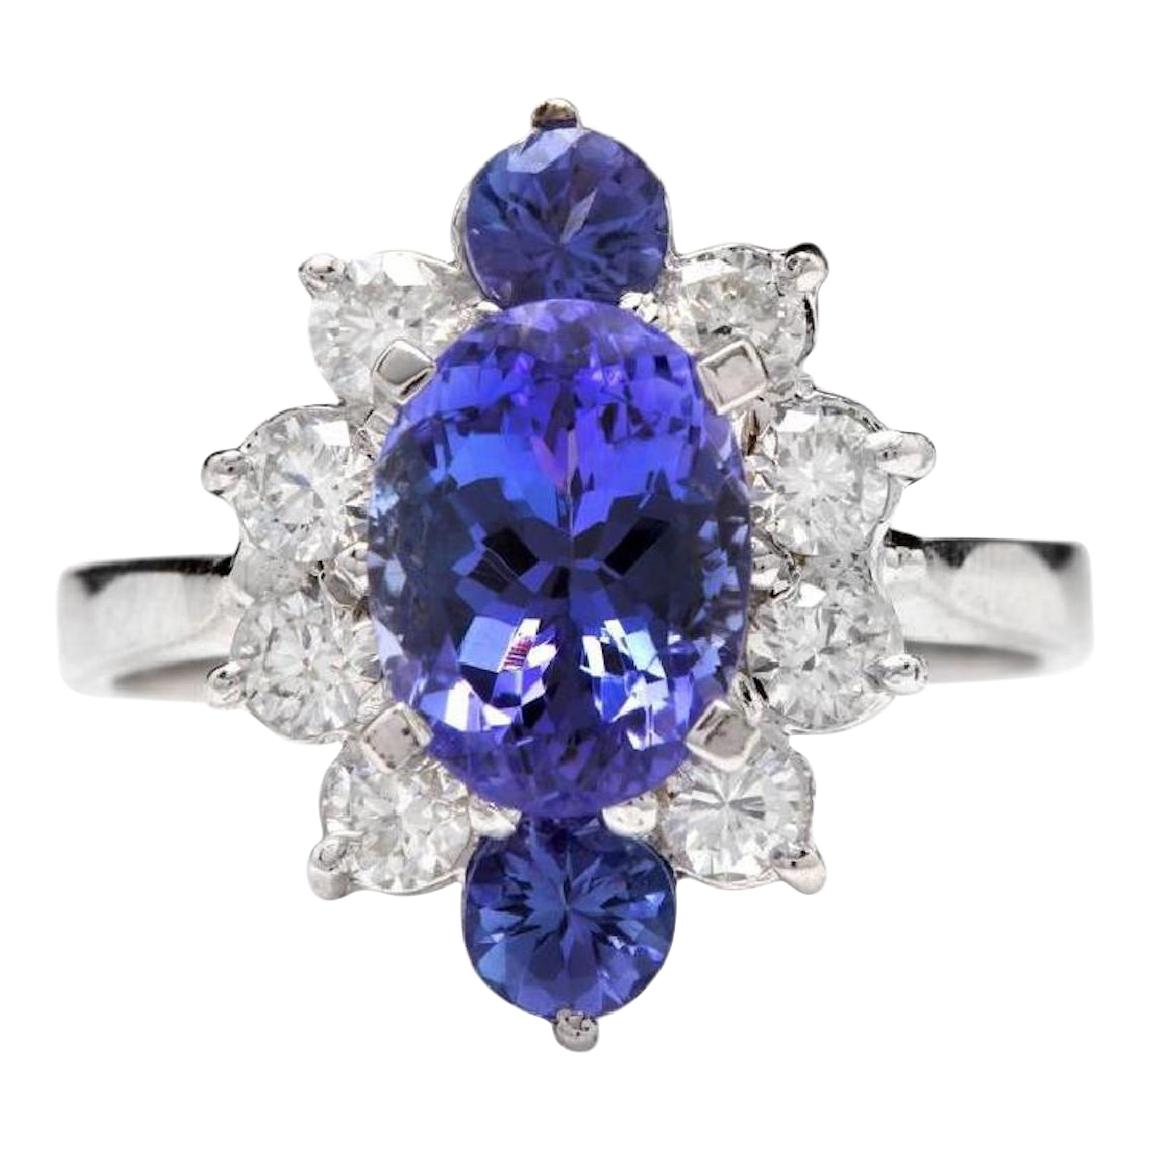 3.00 Carat Natural Very Nice Looking Tanzanite and Diamond 14K Solid White Gold